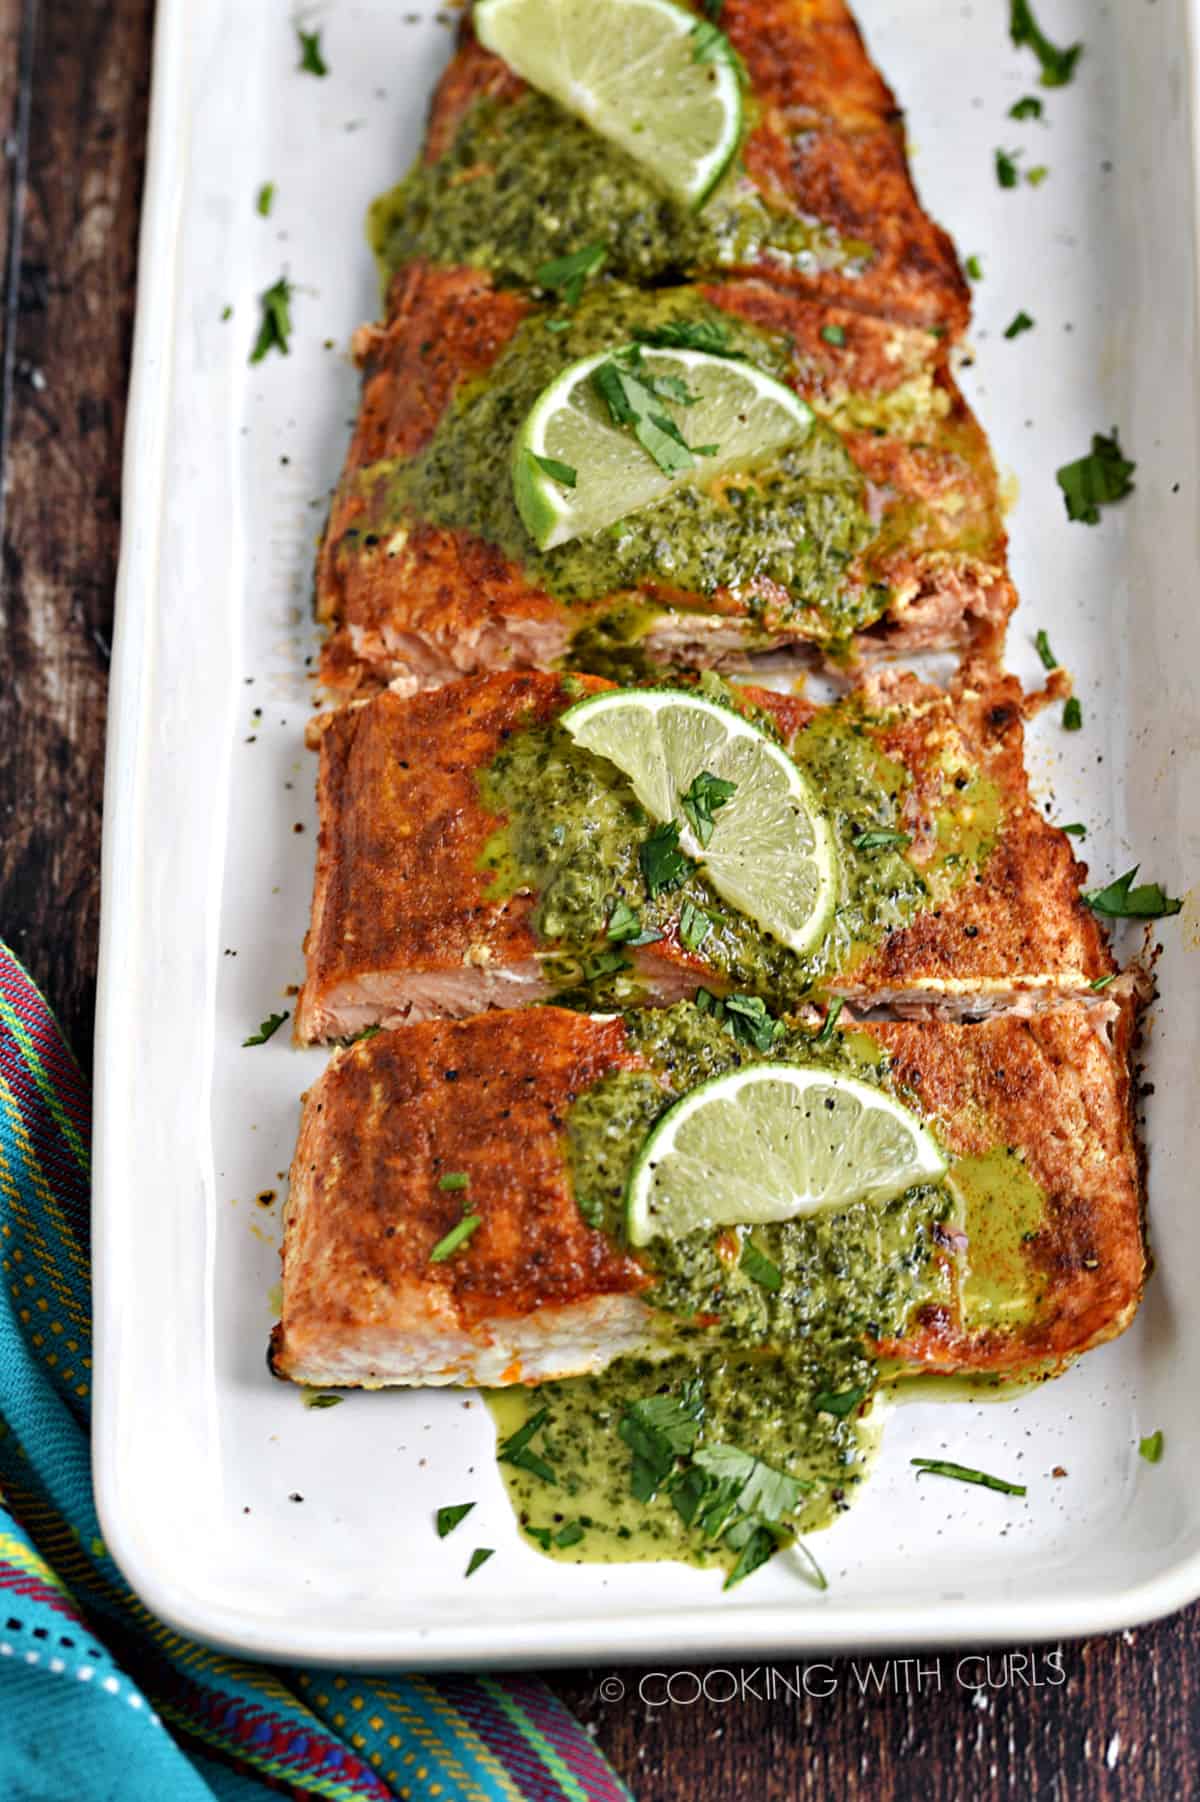 Baked salmon filet topped with cilantro lime sauce on a white platter.